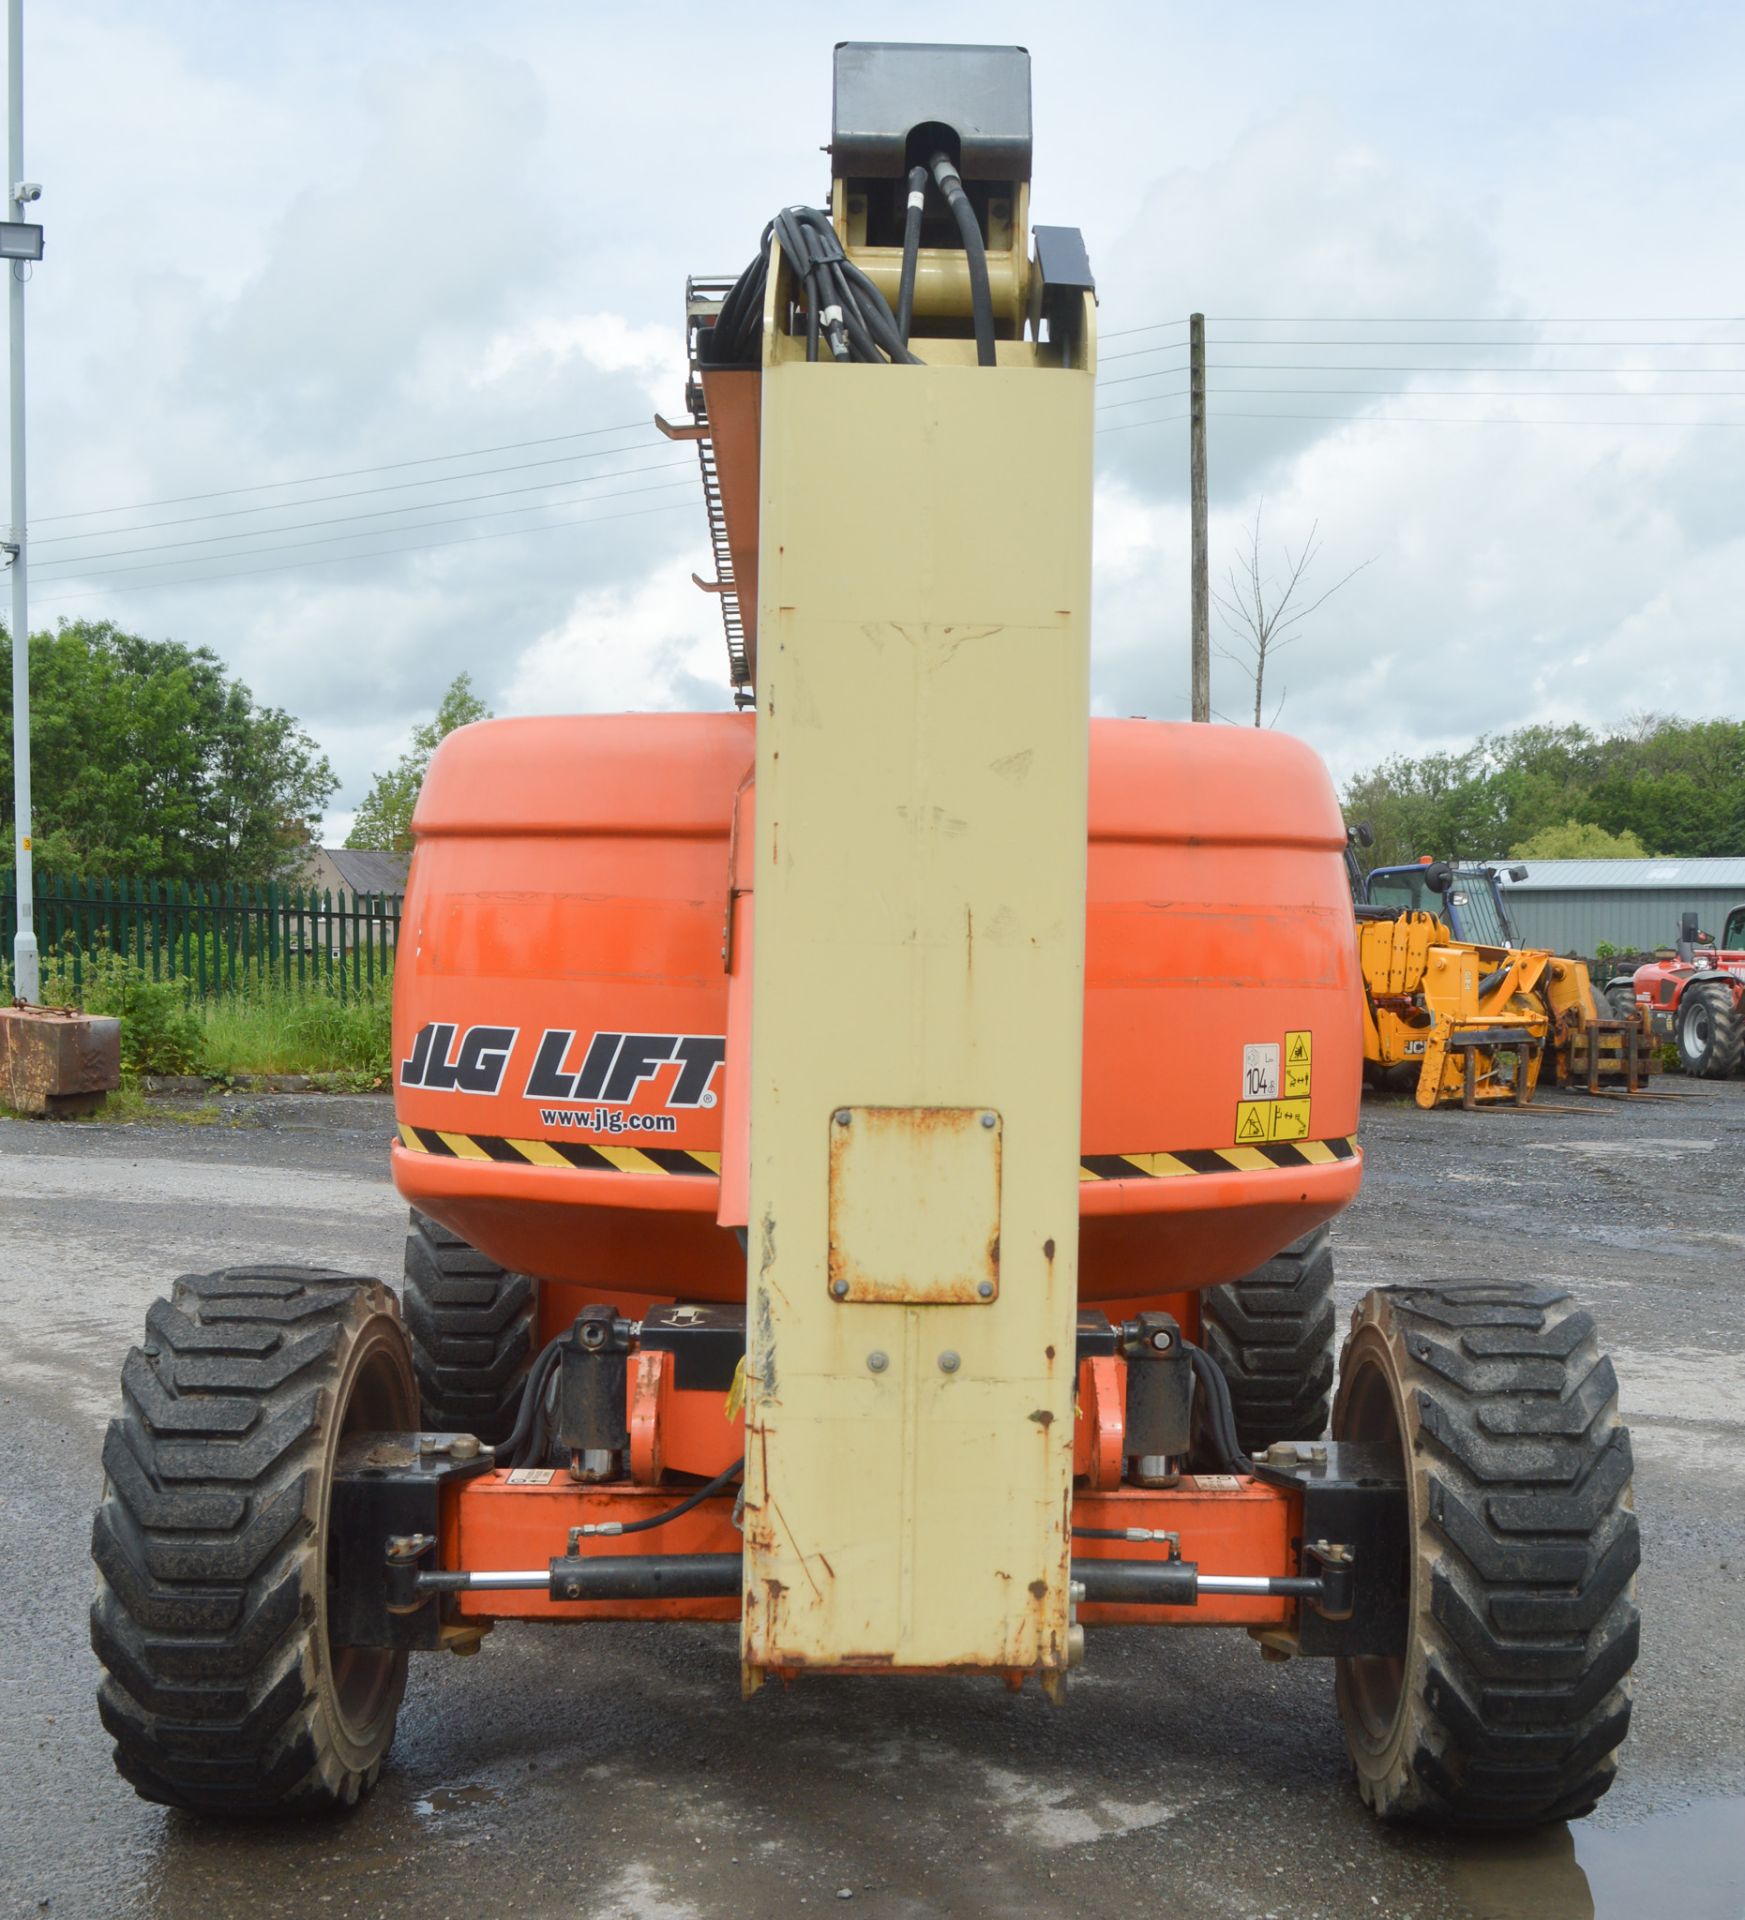 JLG 600AJ 60 ft diesel driven 4x4 articulated boom lift access platform Year: 2012 S/N: 162379 - Image 2 of 10